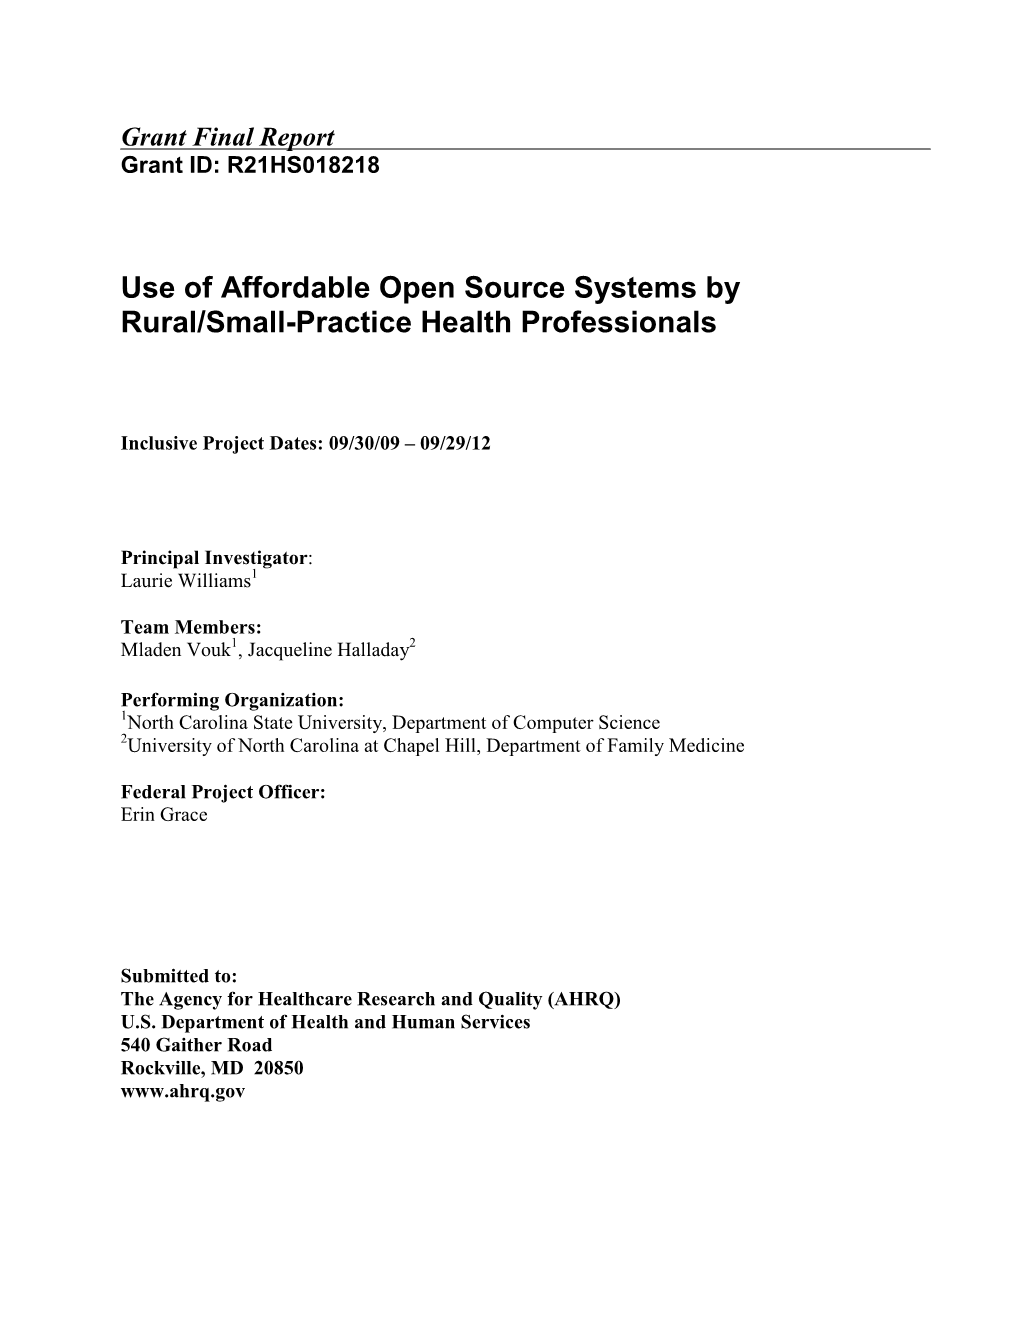 Use of Affordable Open Source Systems by Rural/Small-Practice Health Professionals